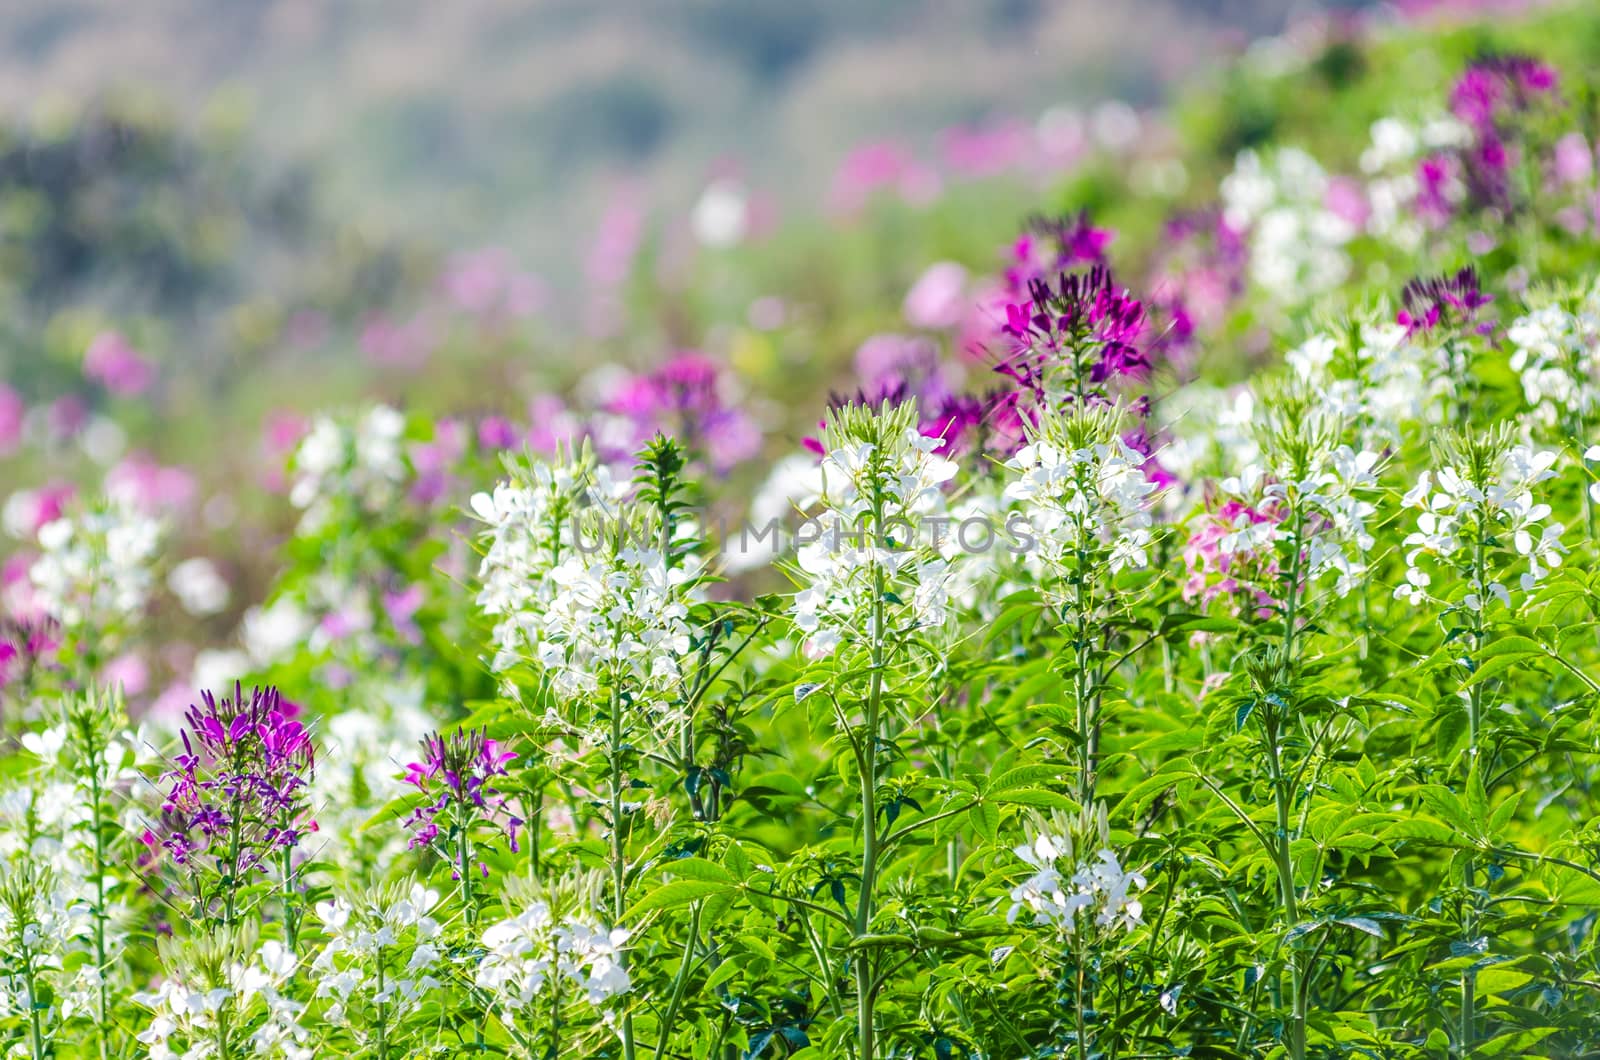 Purple and white flowers in the field with blurred backgroud by wanichs